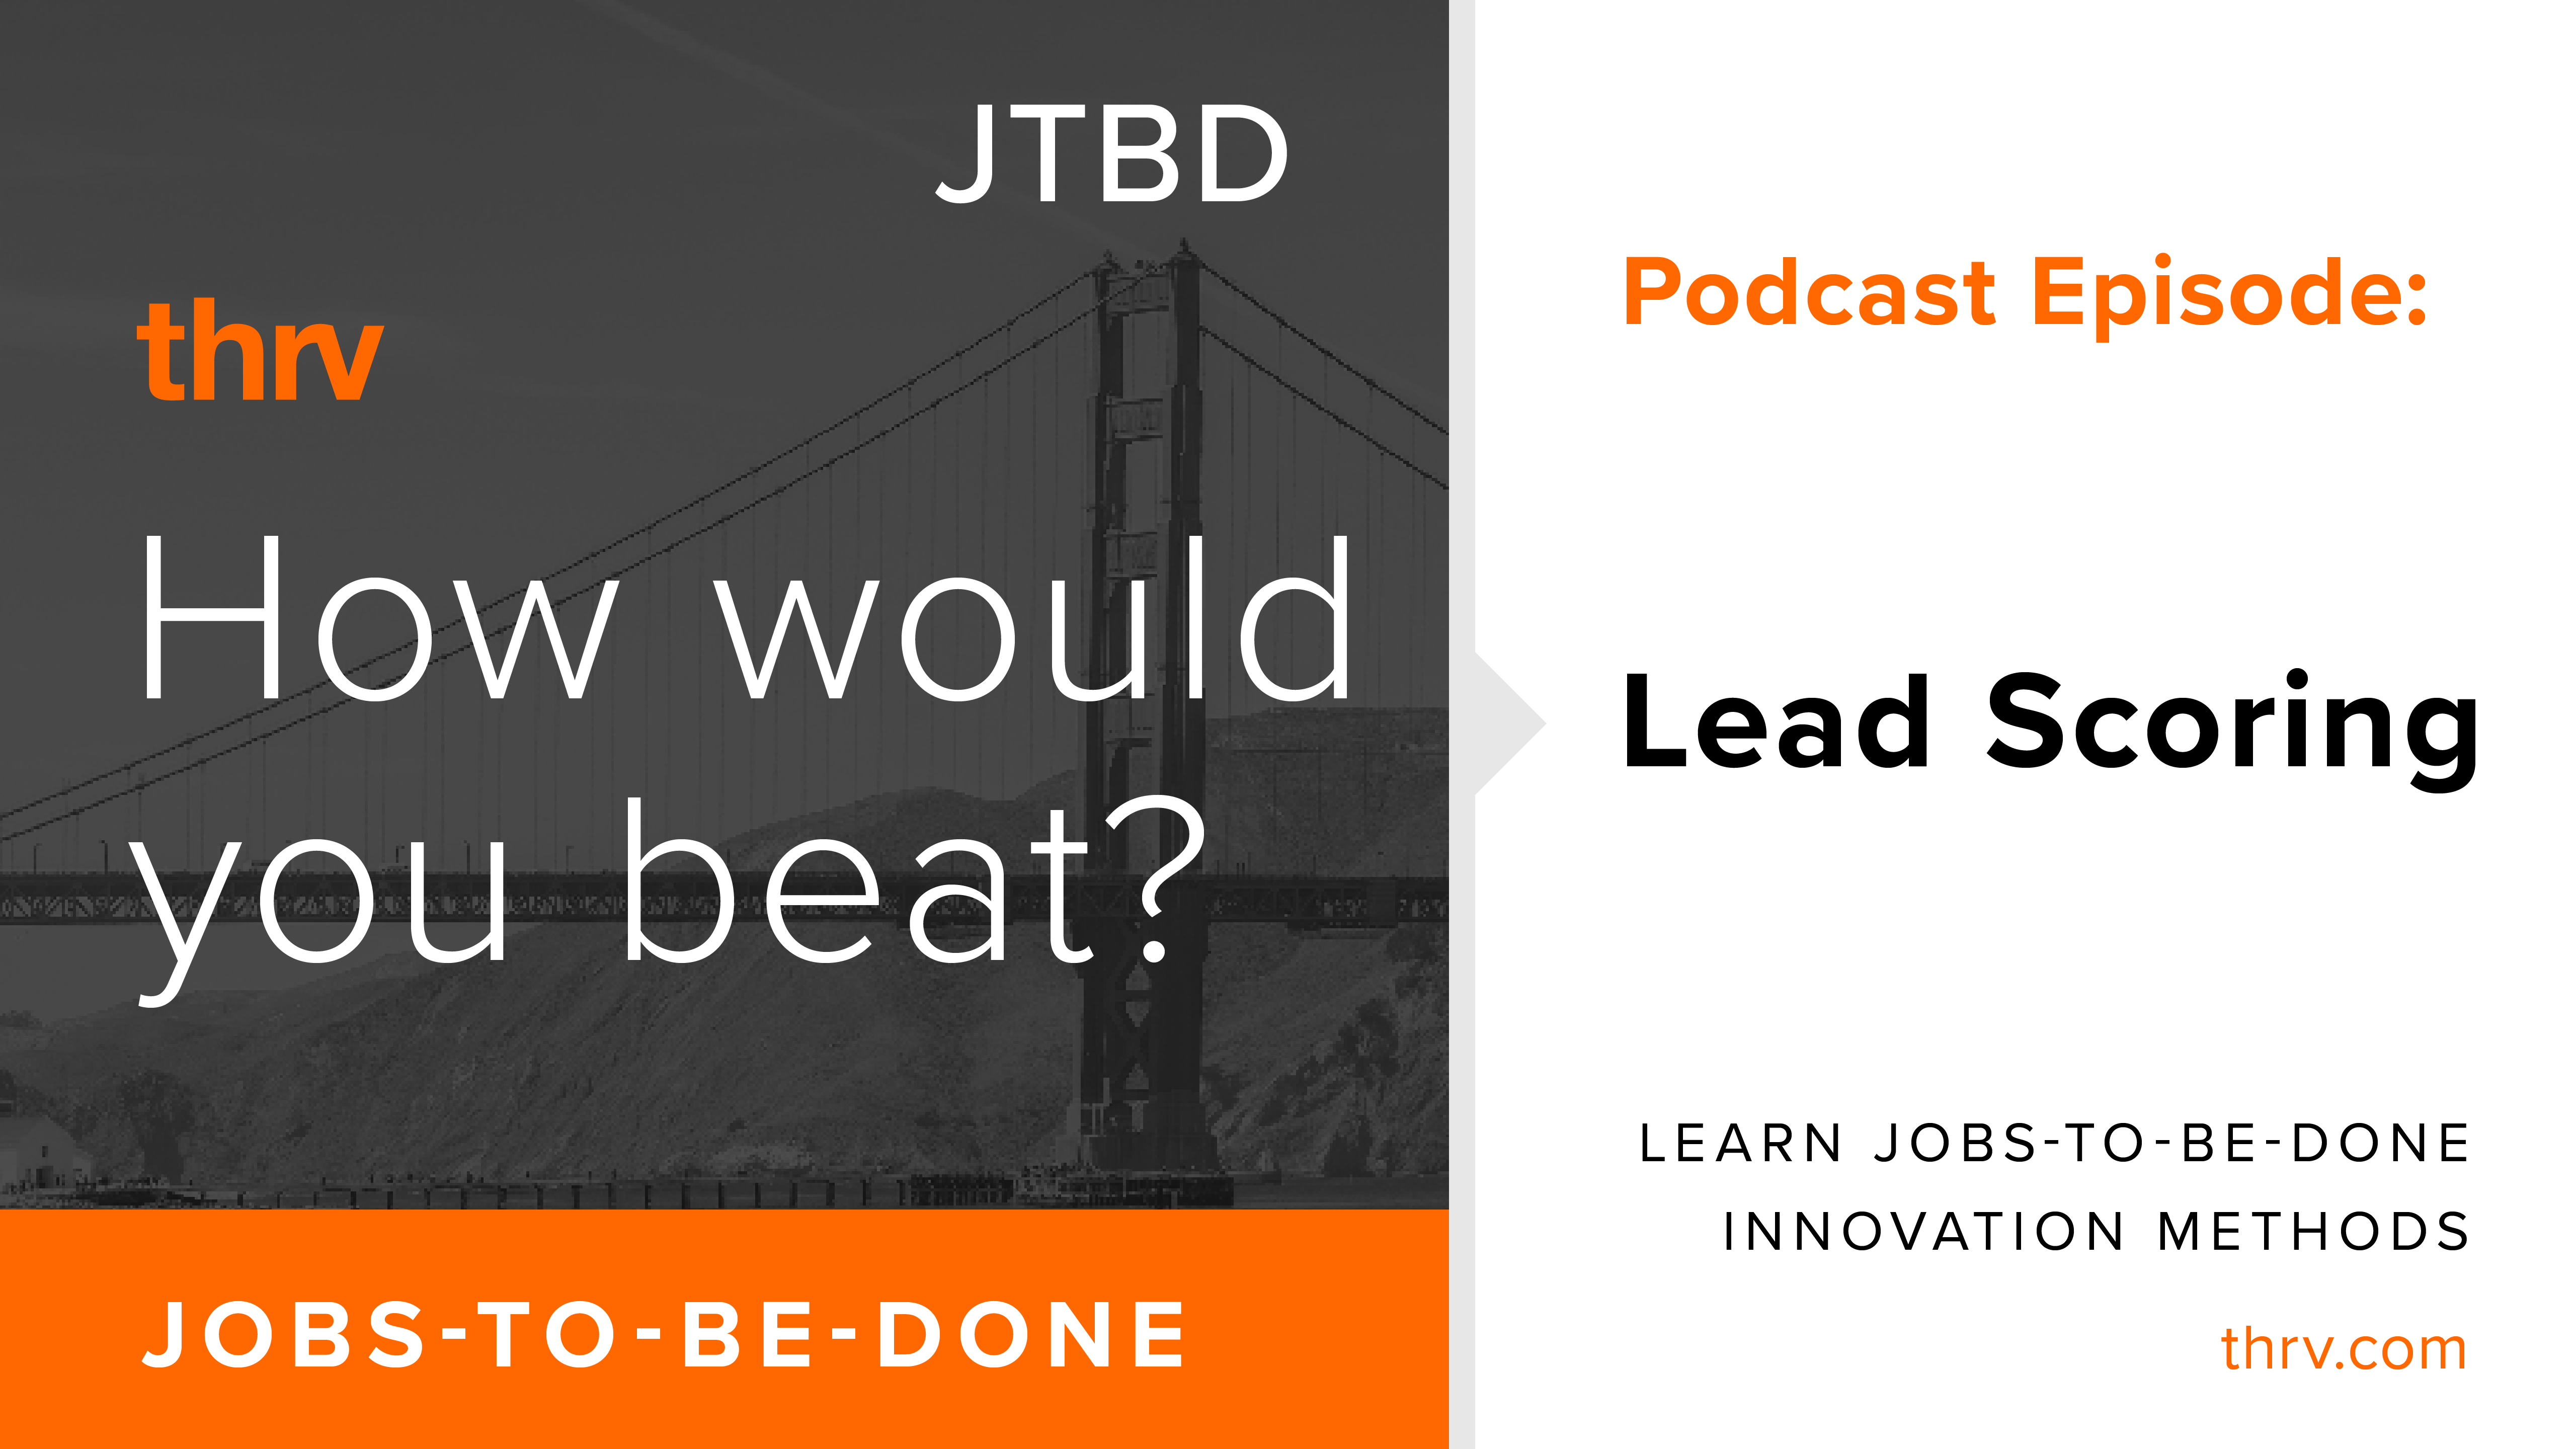 How would you beat lead scoring with Jobs-To-Be-Done